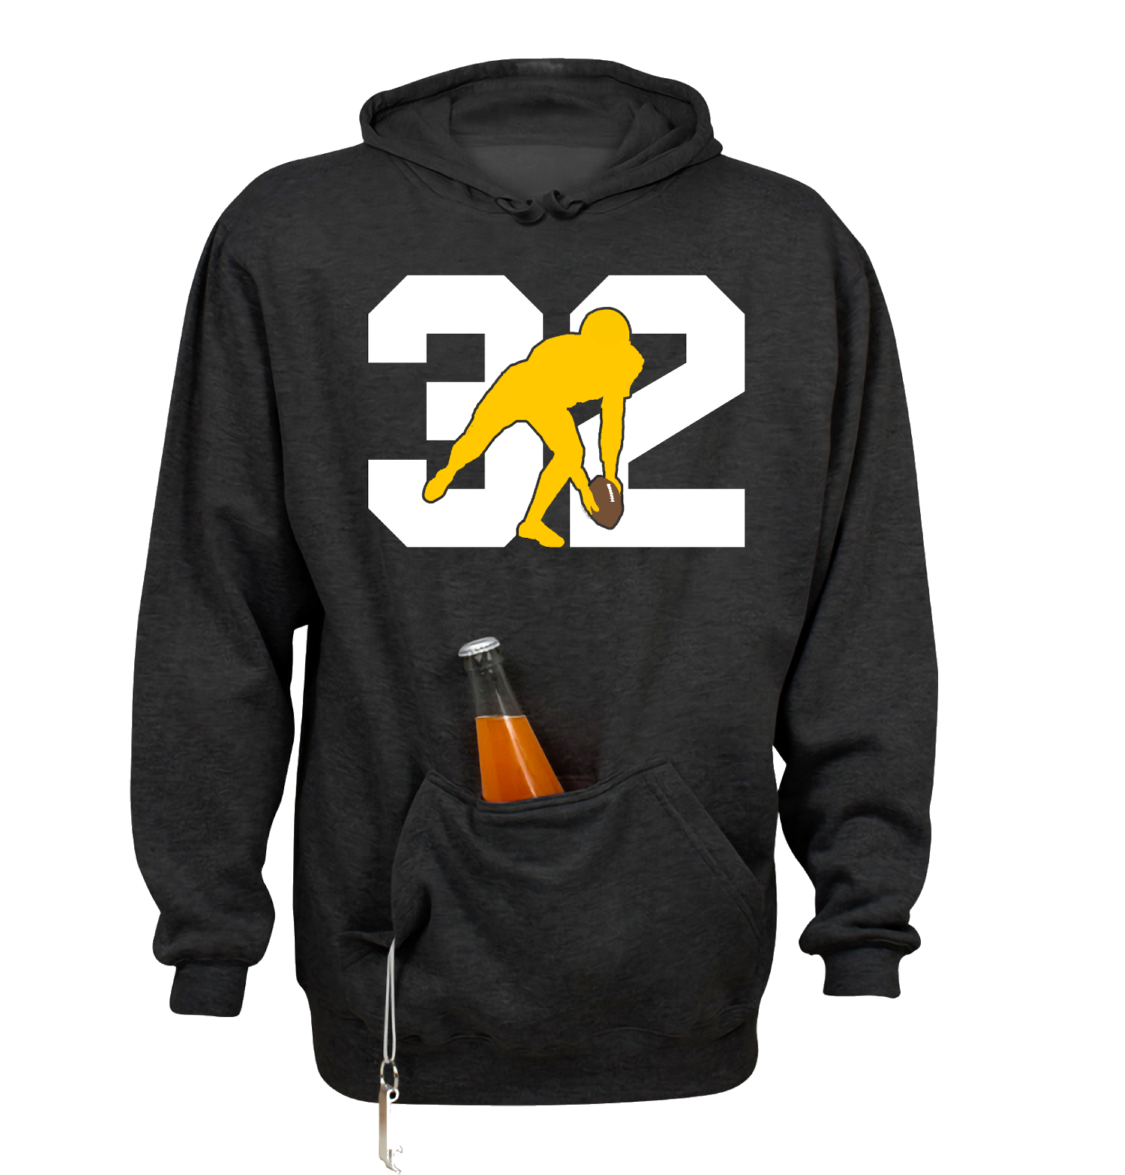 32 Forever - Tailgate Hoodie